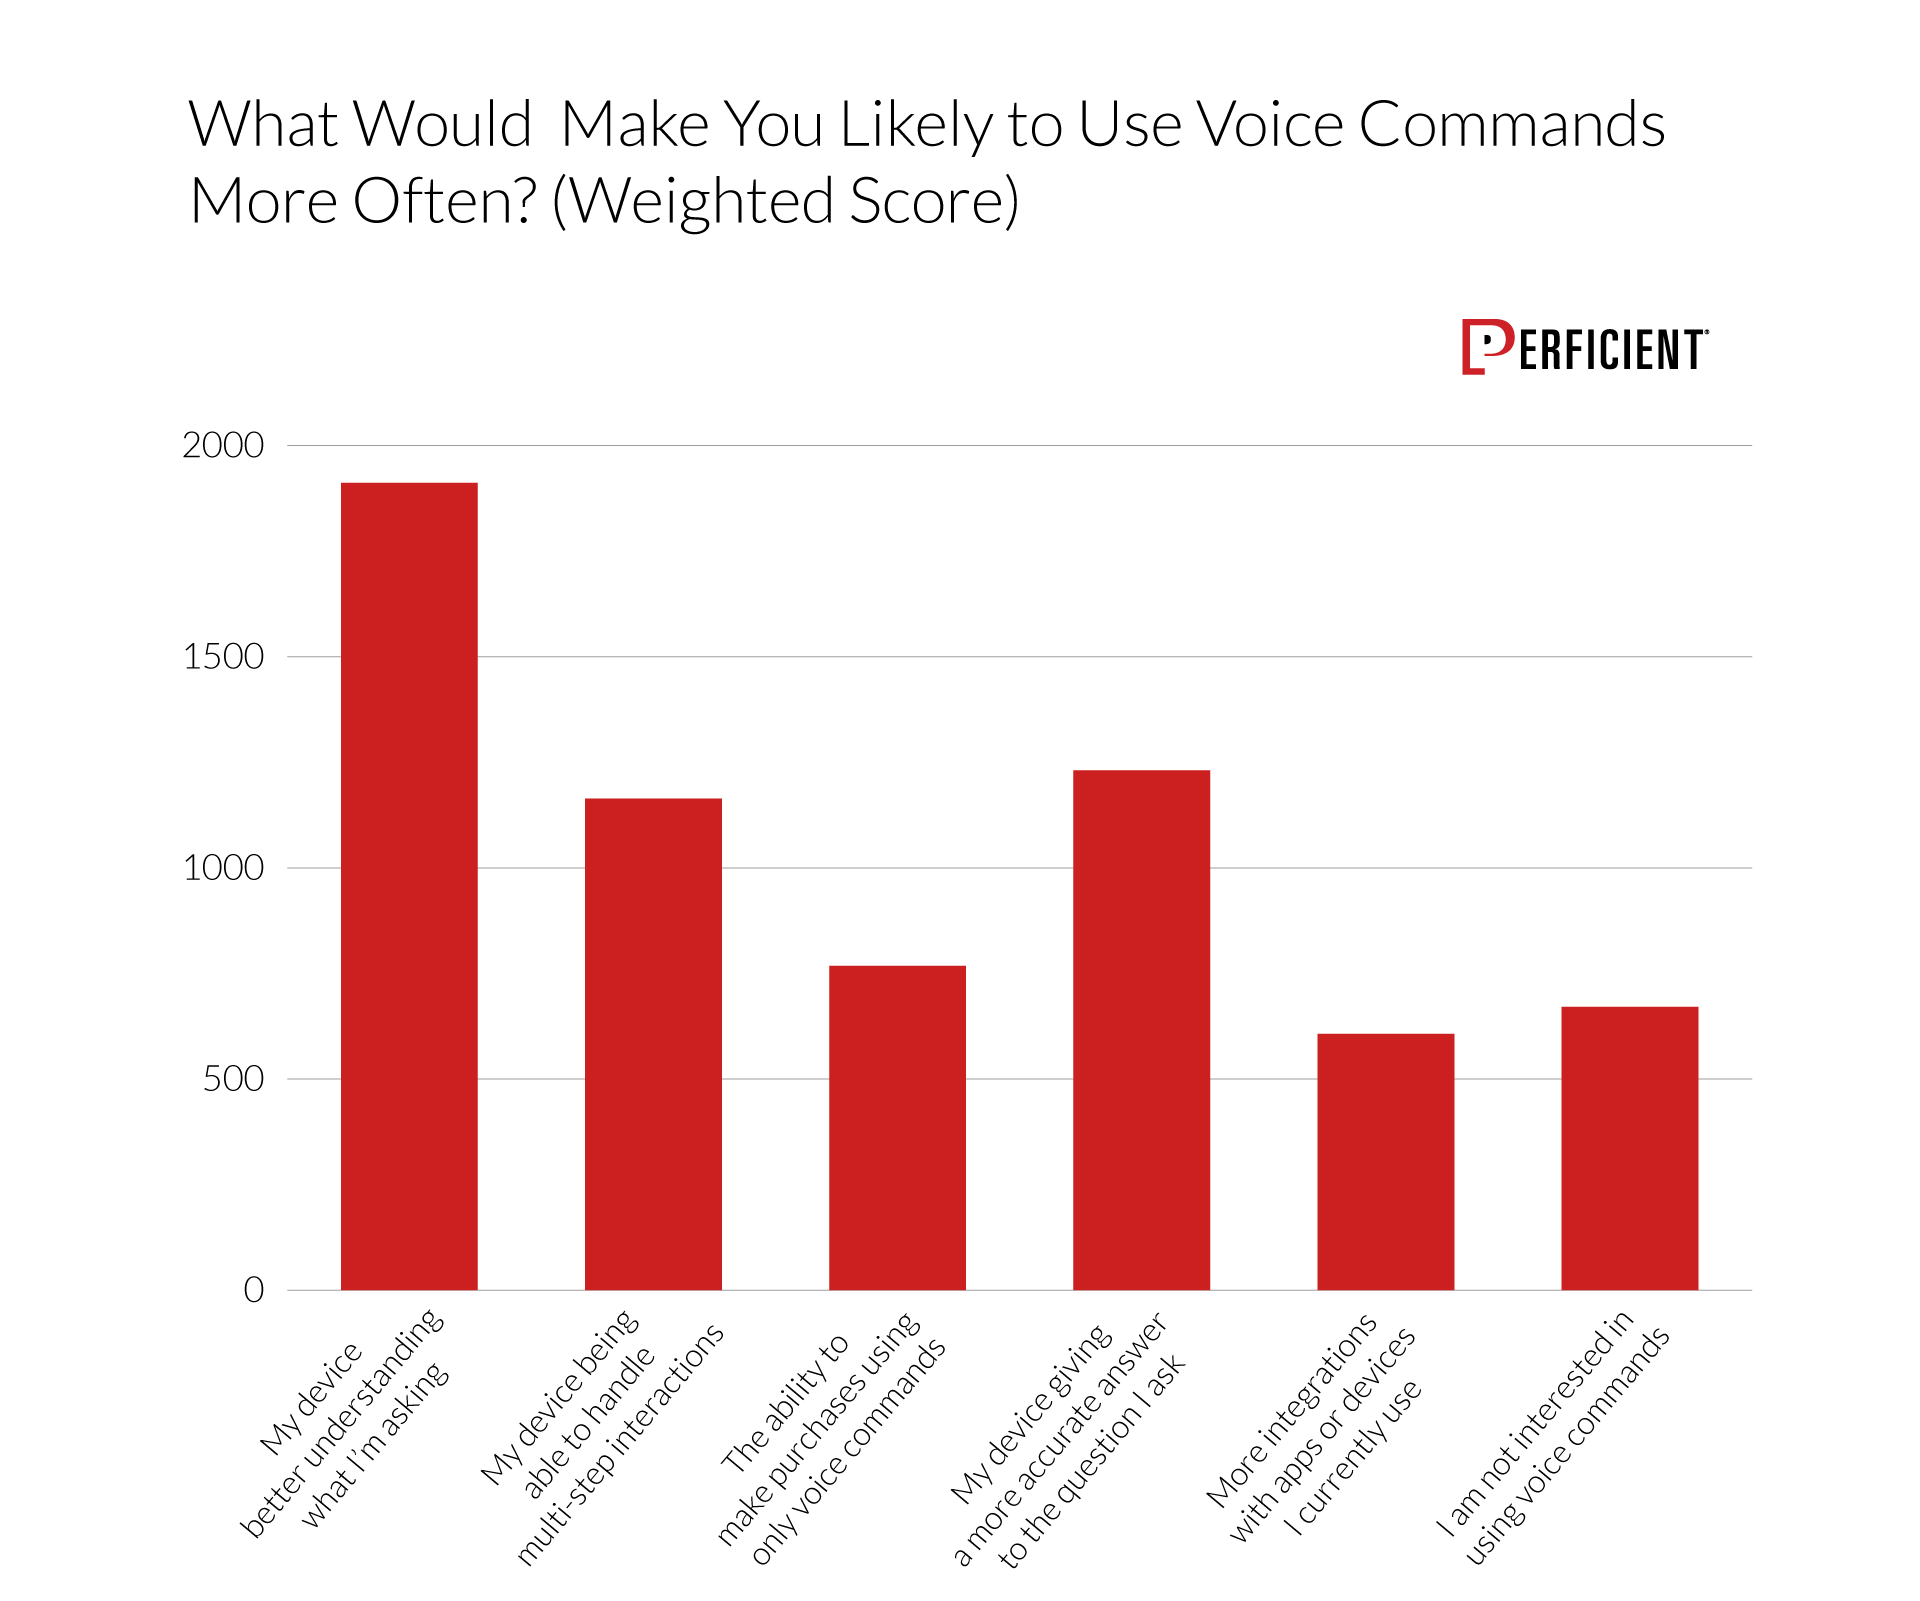 Chart shows factor would make users likely to use voice commands more